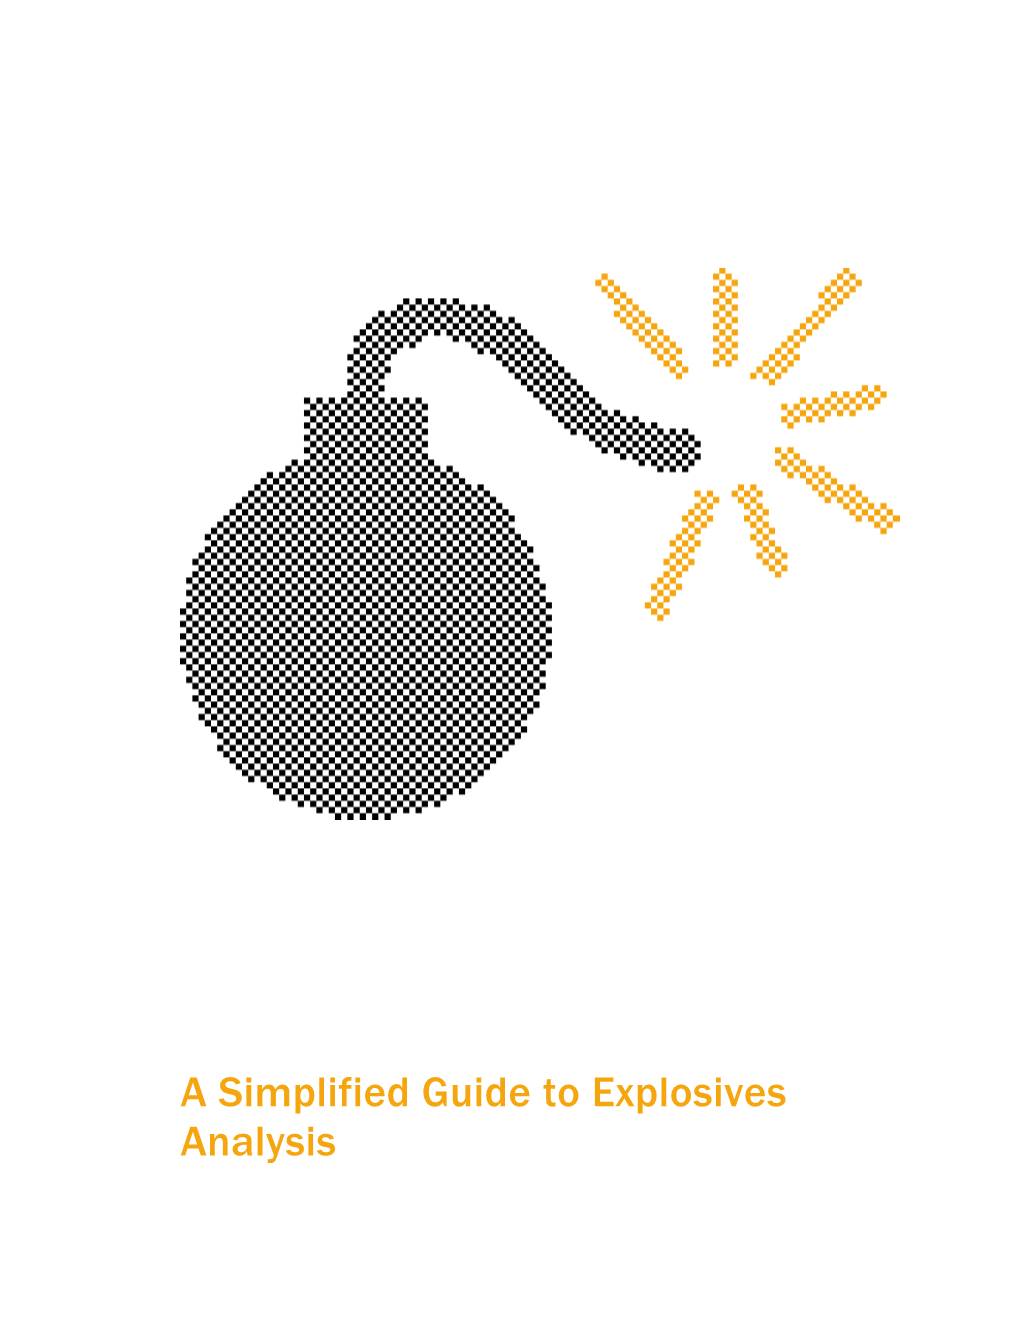 A Simplified Guide to Explosives Analysis Introduction a Backpack Left on a Crowded City Street